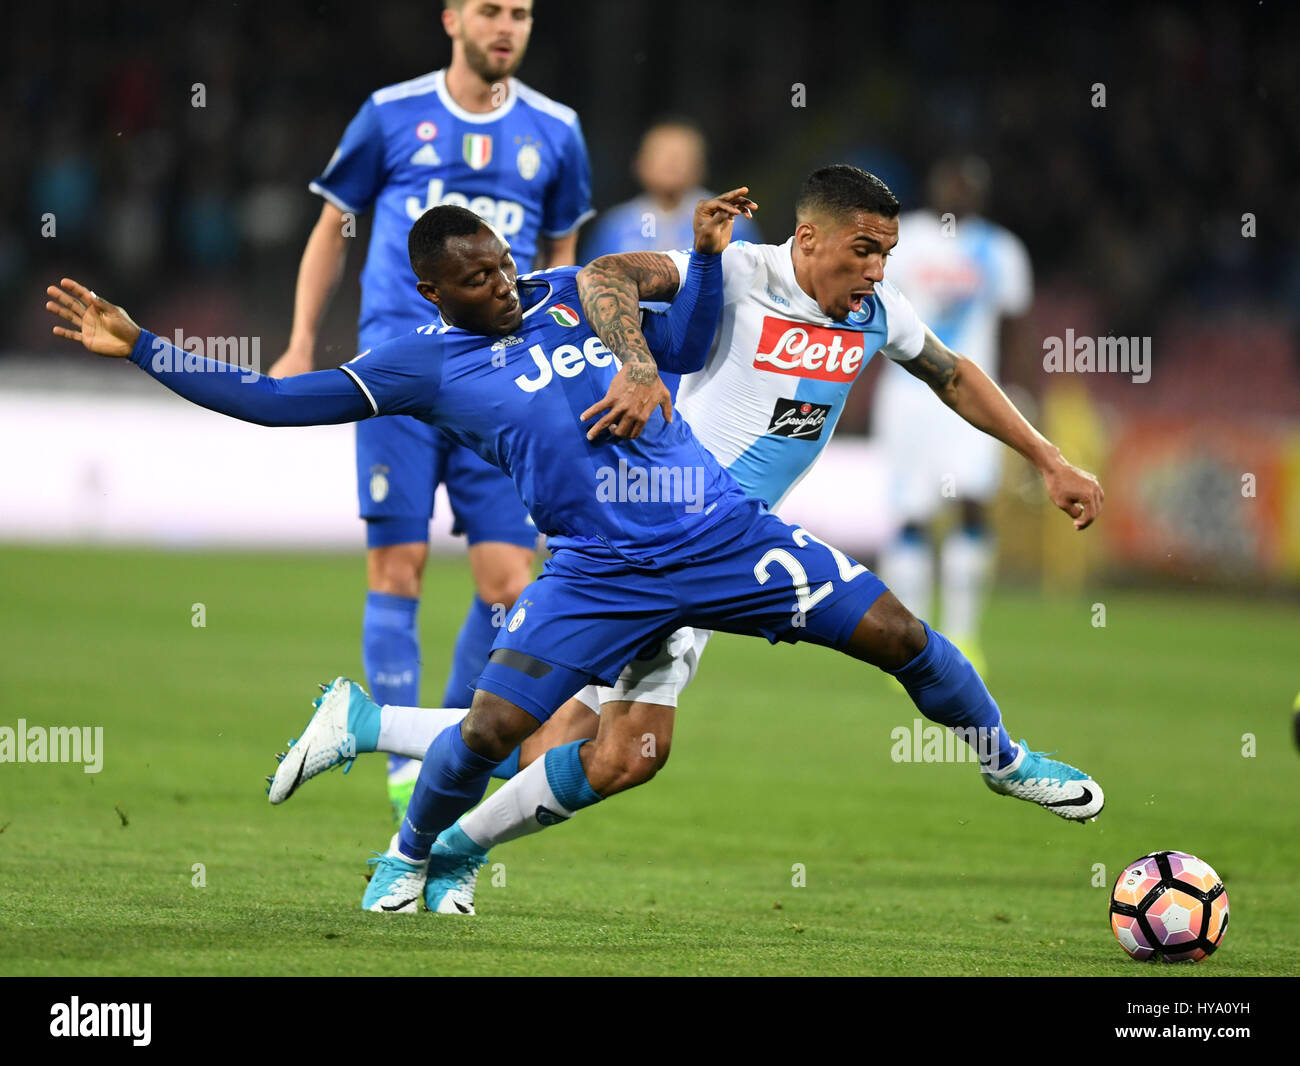 Napoli, Italy. 2nd Apr, 2017. Juventus' Kwadwo Asamoah (L) competes with Napoli's Allan during the Italian Serie A soccer match in Napoli, Italy, April 2, 2017. The game ended with a 1-1 tie. Credit: Alberto Lingria/Xinhua/Alamy Live News Stock Photo